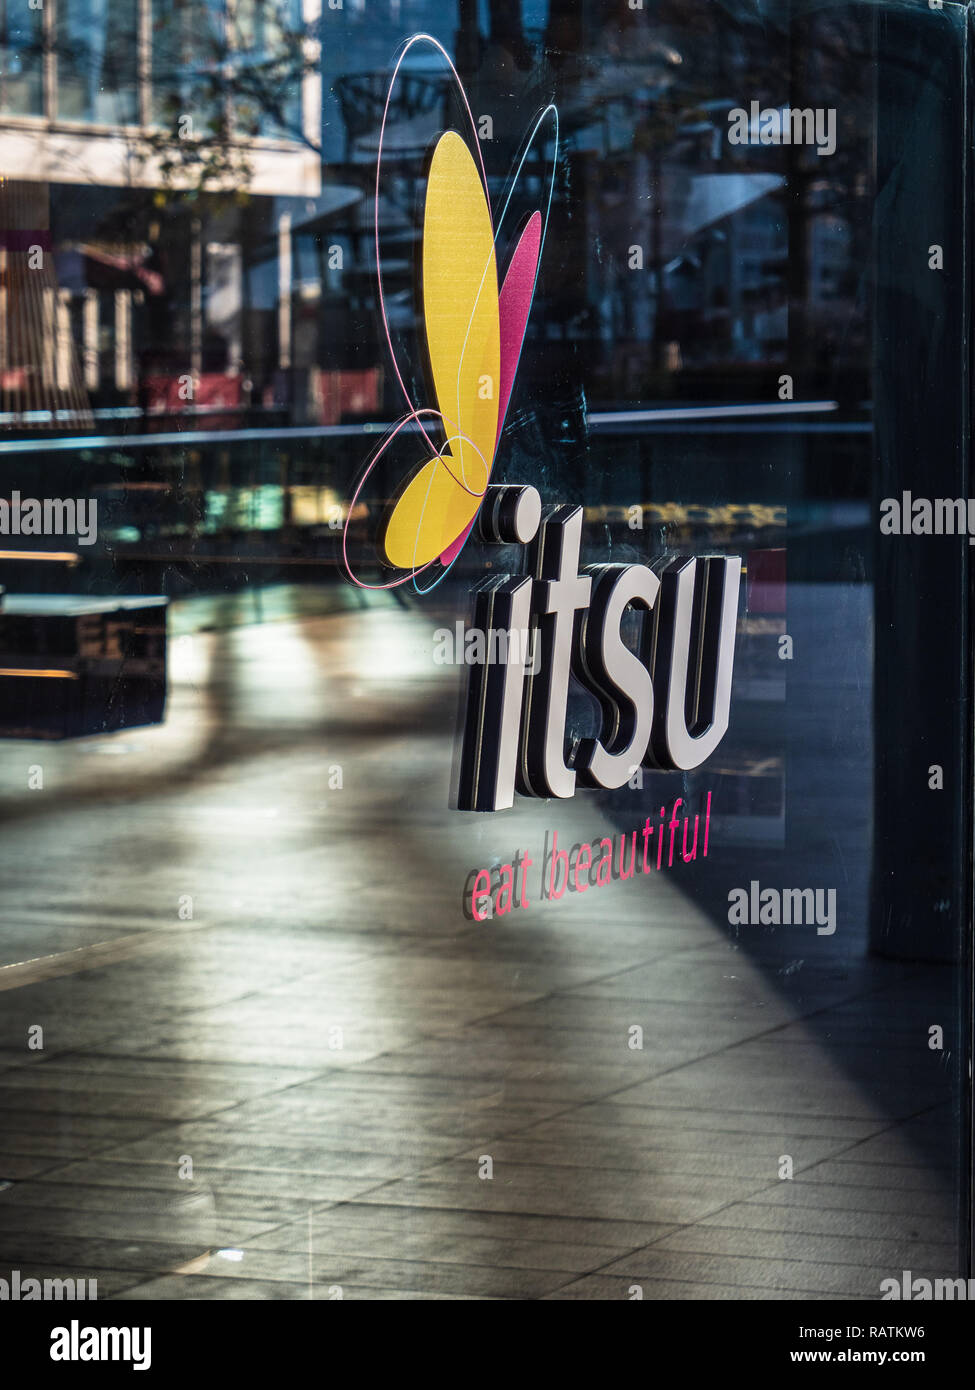 ITSU London - Sign on an ITSU asian style fast food restaurant in London UK Stock Photo